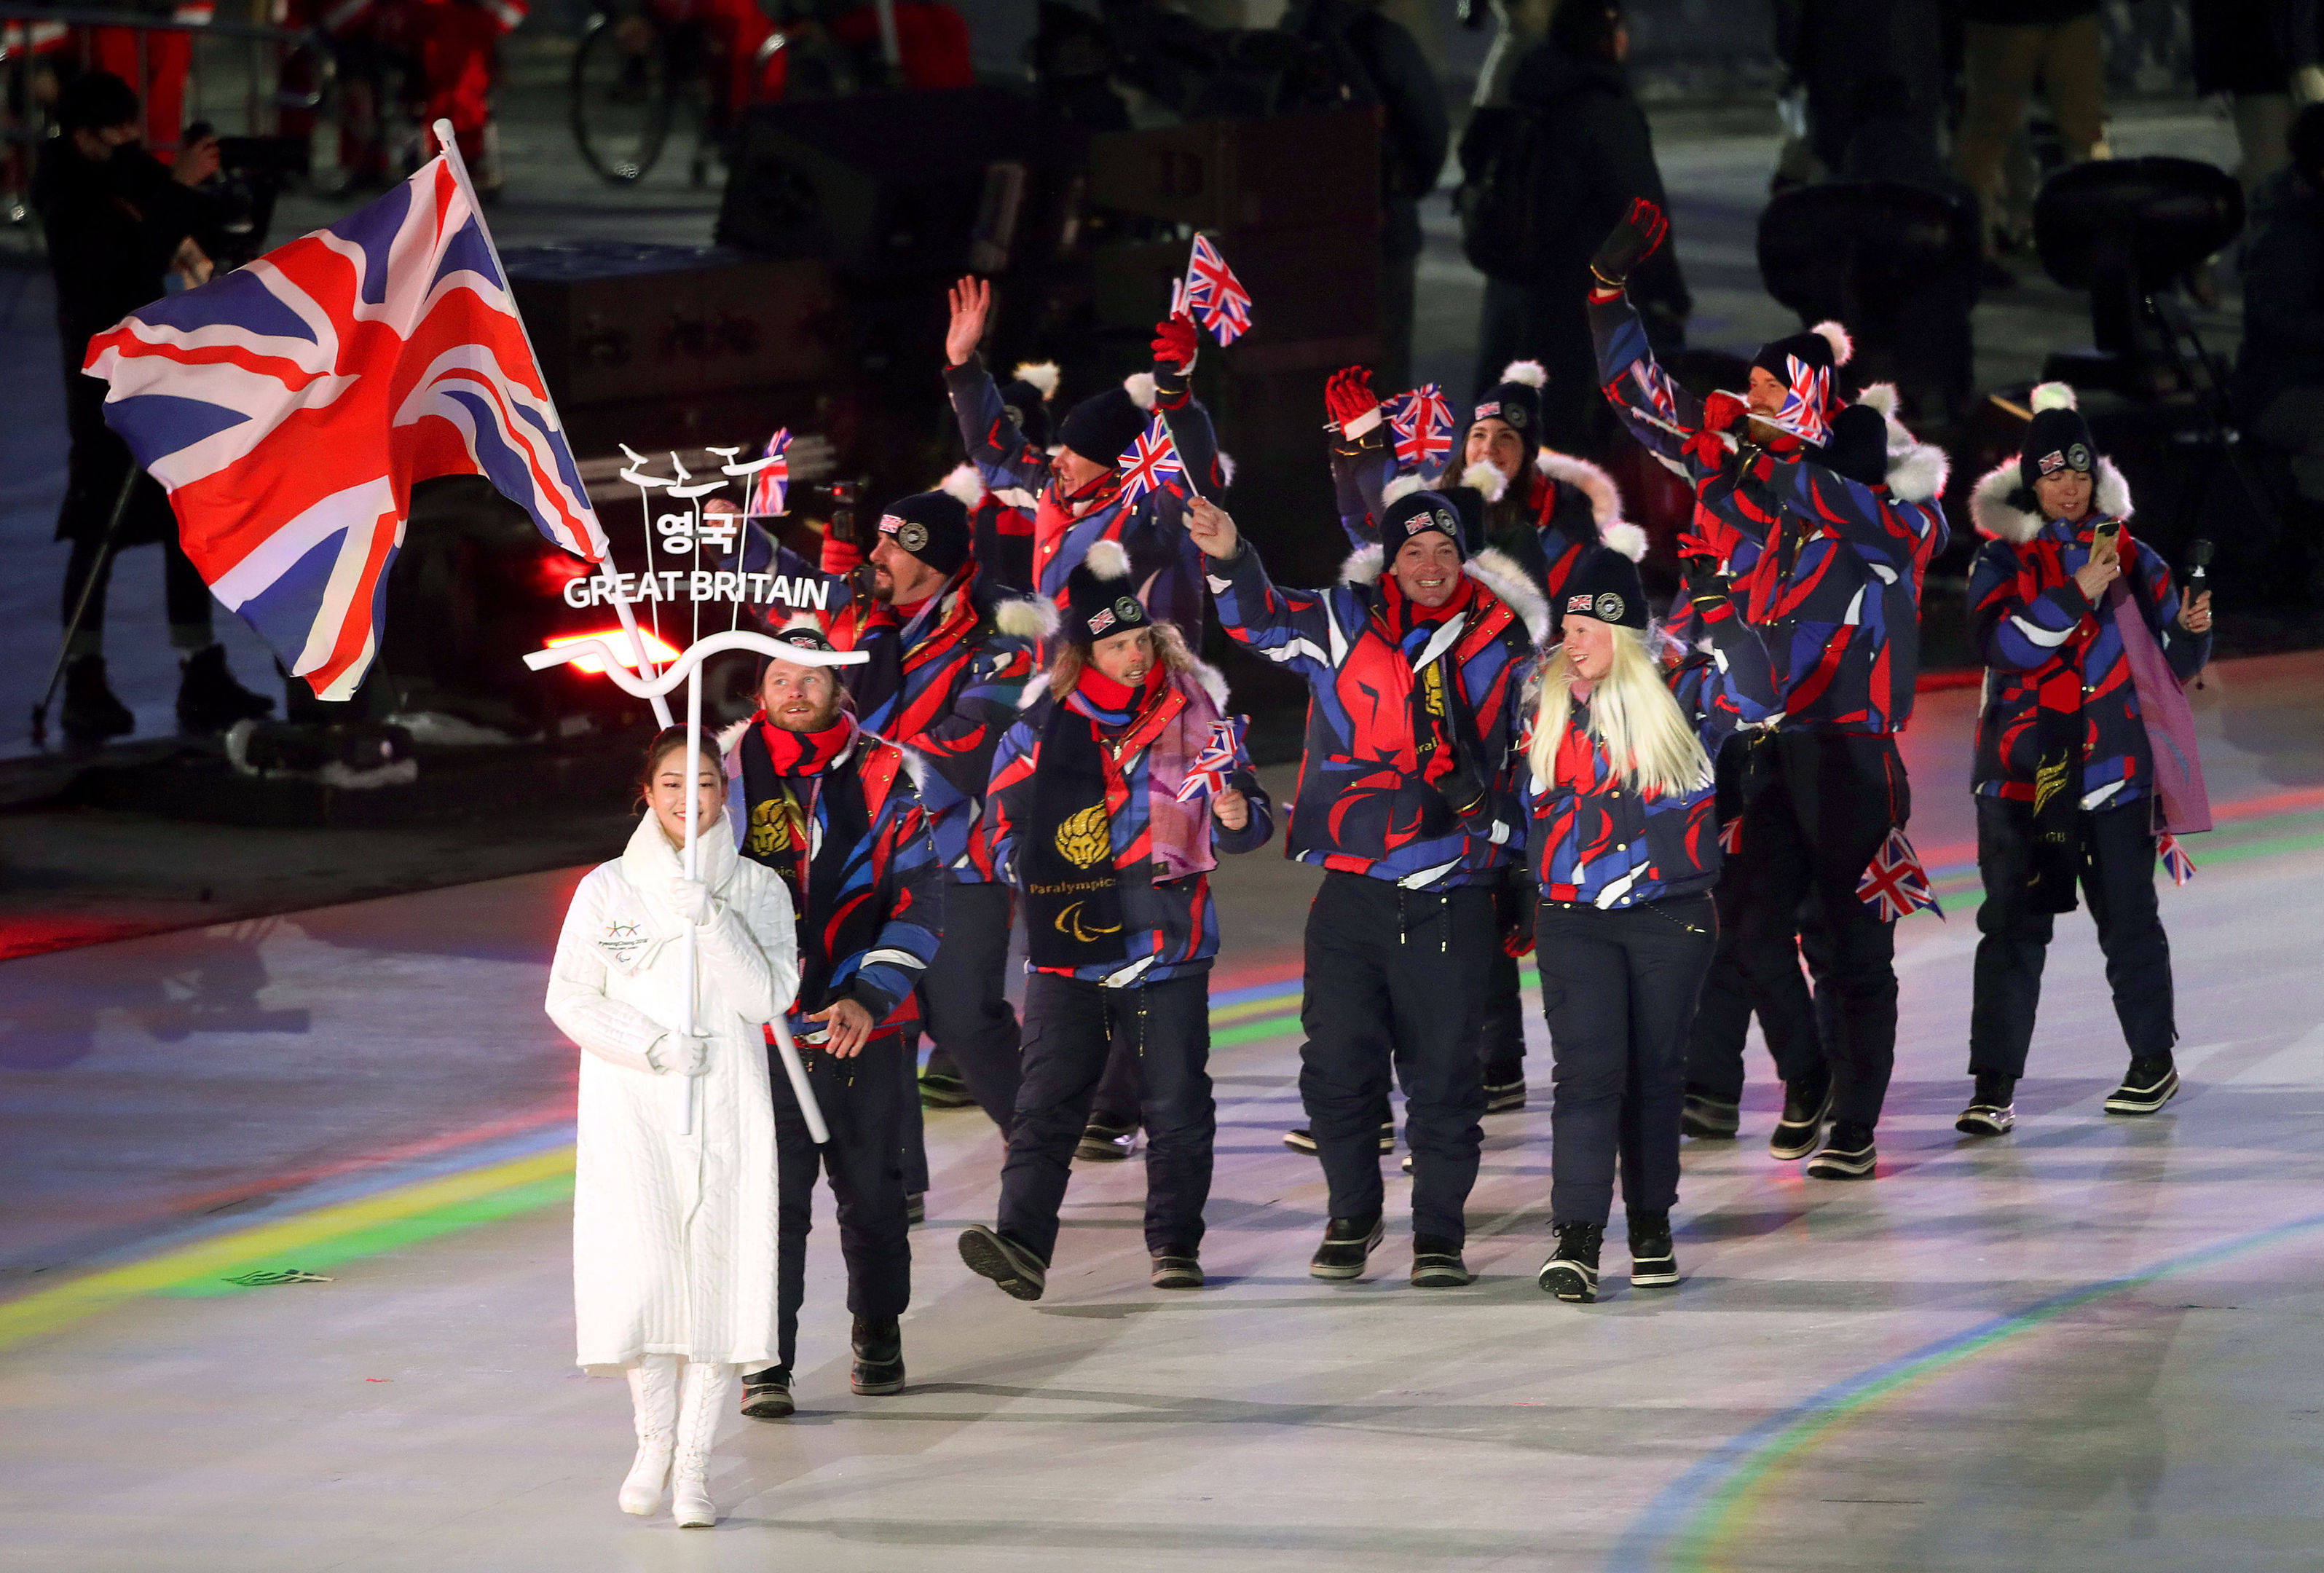 Team GB, led by flag bearer Owen Pick, during the opening ceremony of the PyeongChang 2018 Winter Paralympics at the PyeongChang Olympic Stadium in South Korea.